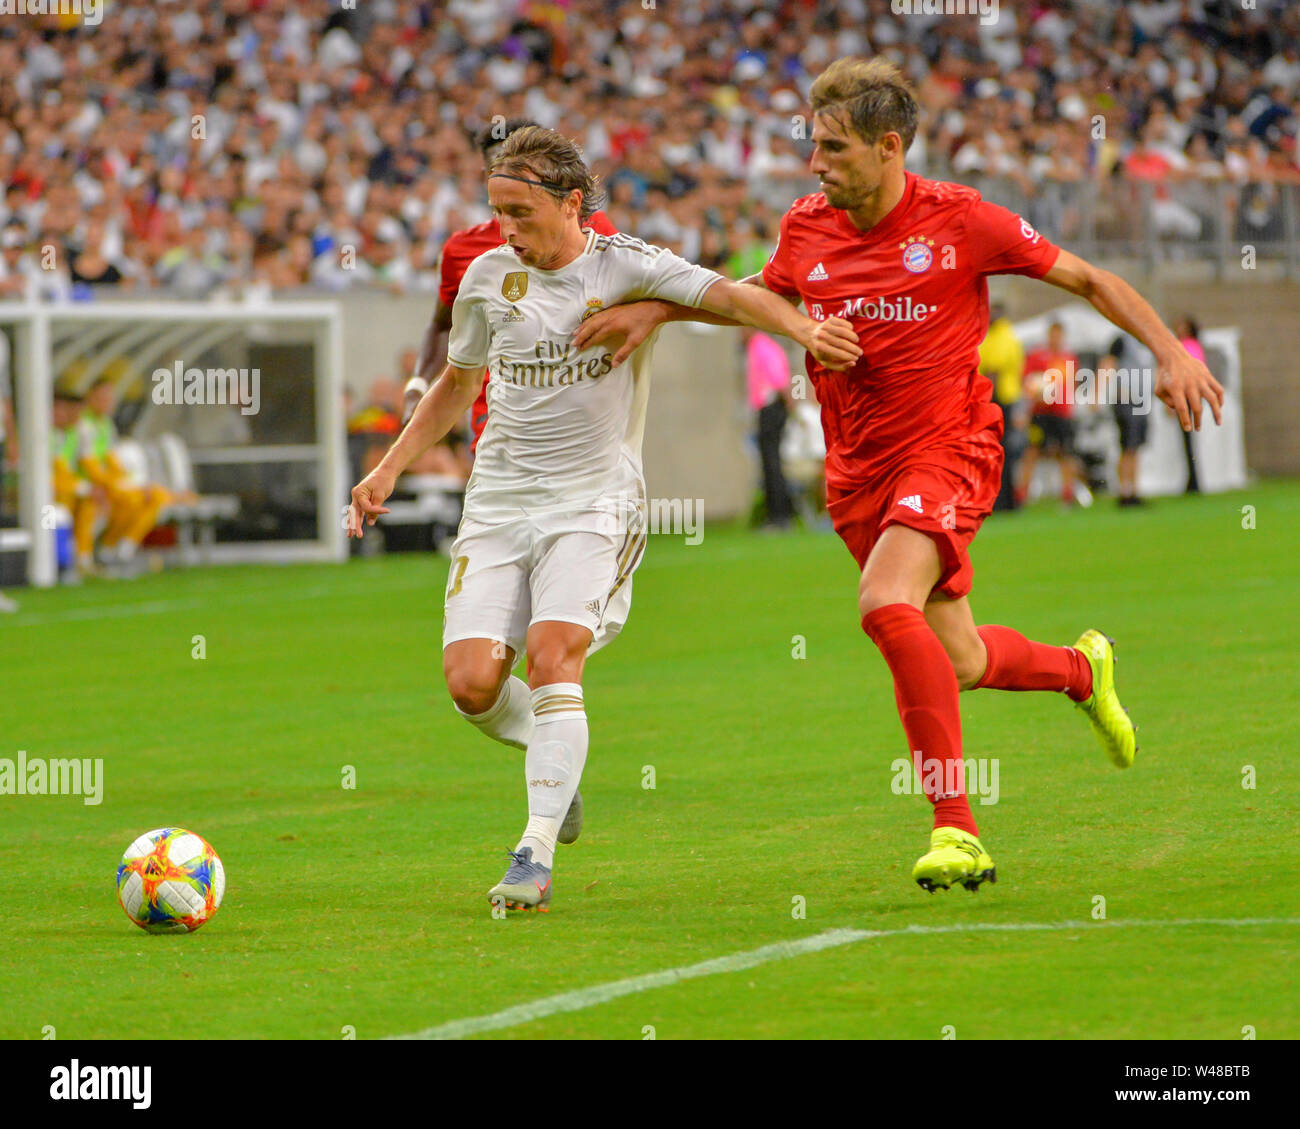 Houston, TX, USA. 20th July, 2019. Real Madrid midfielder, Luka Modric (10), fights with Bayern midfielder, Javi Martinez (8), during the 2019 International Champions Cup match between Real Madrid and FC Bayern, at NRG Stadium in Houston, TX. FC Bayern defeated Real Madrid, 3-1. Mandatory Credit: Kevin Langley/Sports South Media/CSM/Alamy Live News Stock Photo